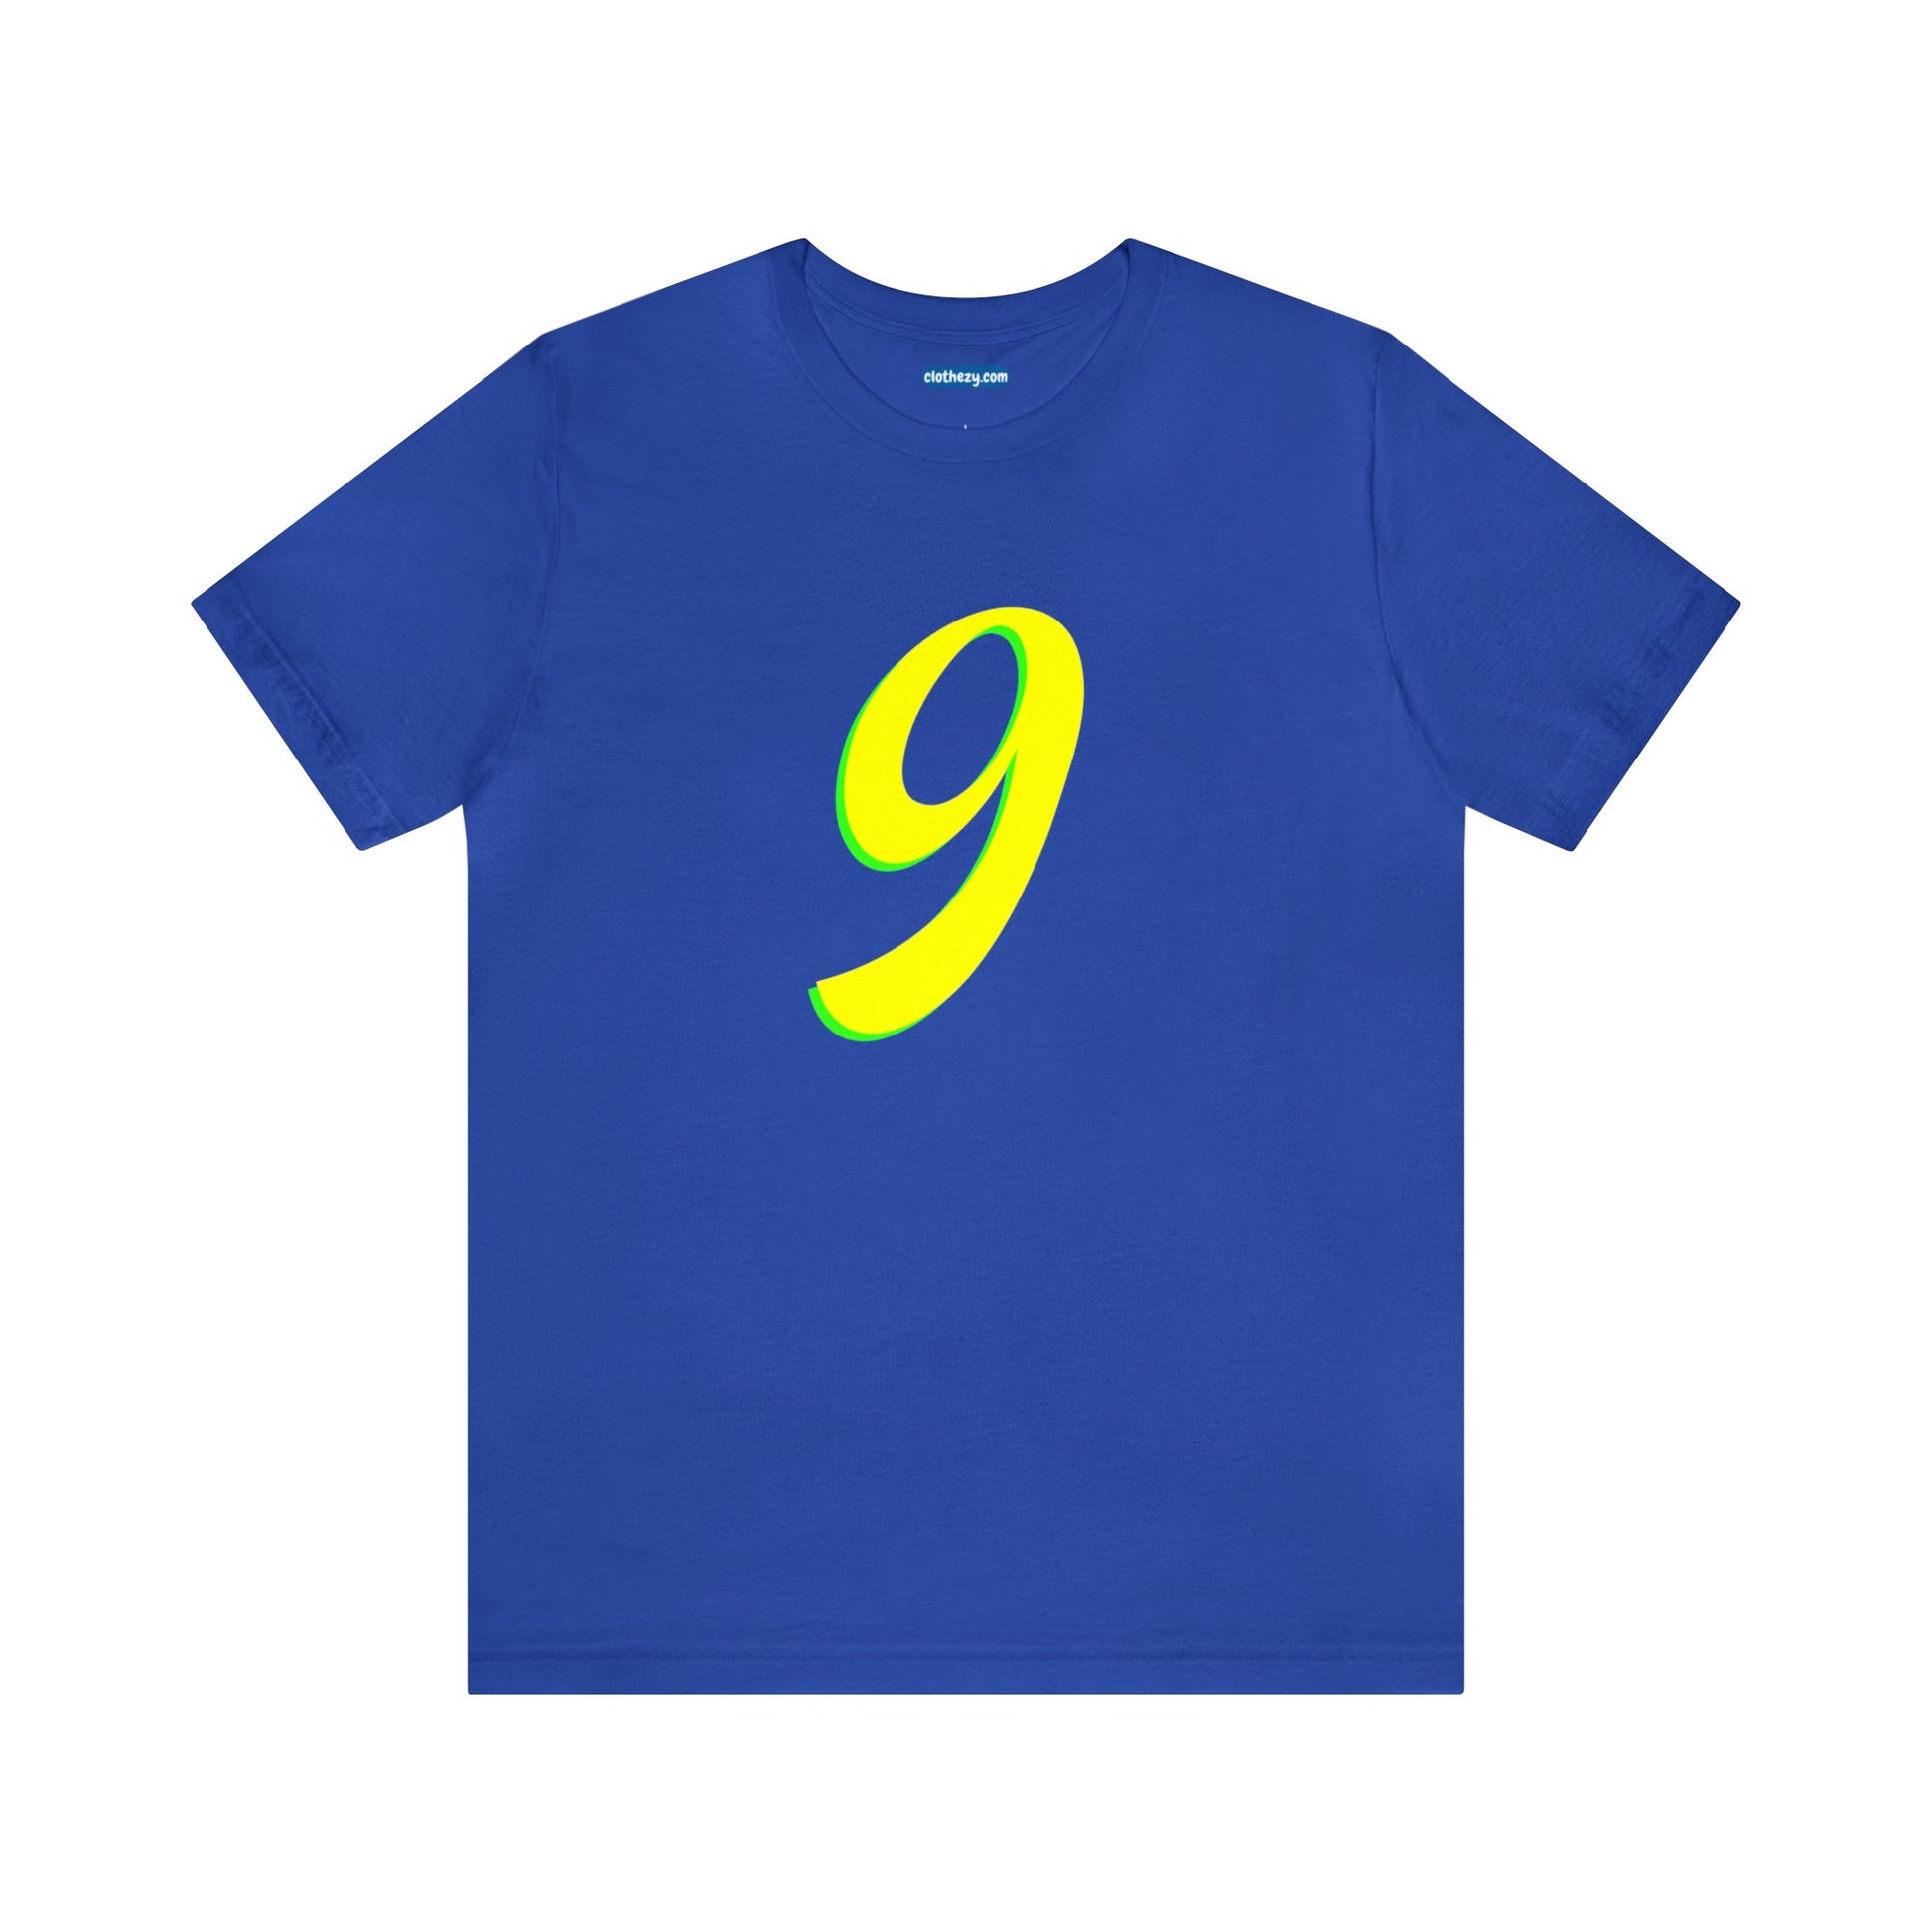 Number 9 Design - Soft Cotton Tee for birthdays and celebrations, Gift for friends and family, Multiple Options by clothezy.com in Royal Blue Size Small - Buy Now